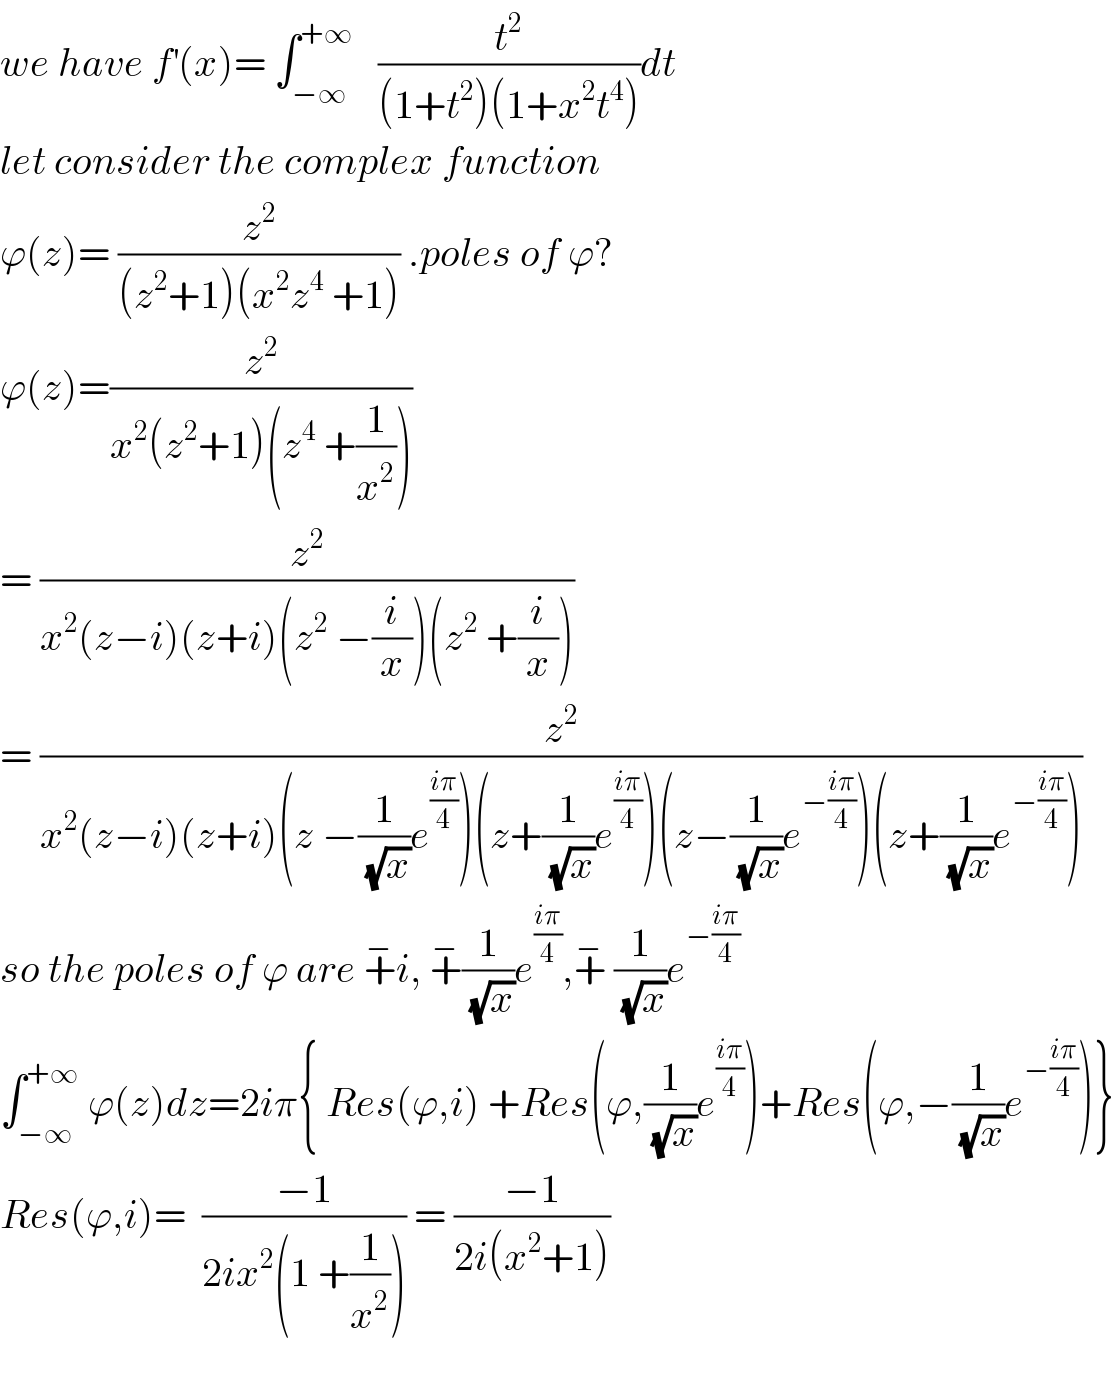 we have f^′ (x)= ∫_(−∞) ^(+∞)    (t^2 /((1+t^2 )(1+x^2 t^4 )))dt  let consider the complex function  ϕ(z)= (z^2 /((z^2 +1)(x^2 z^4  +1))) .poles of ϕ?  ϕ(z)=(z^2 /(x^2 (z^2 +1)(z^4  +(1/x^2 ))))   = (z^2 /(x^2 (z−i)(z+i)(z^2  −(i/x))(z^2  +(i/x))))  = (z^2 /(x^2 (z−i)(z+i)(z −(1/(√x))e^((iπ)/4) )(z+(1/(√x))e^((iπ)/4) )(z−(1/(√x))e^(−((iπ)/4)) )(z+(1/(√x))e^(−((iπ)/4)) )))  so the poles of ϕ are +^− i, +^− (1/(√x))e^((iπ)/4) ,+^−  (1/(√x))e^(−((iπ)/4))   ∫_(−∞) ^(+∞)  ϕ(z)dz=2iπ{ Res(ϕ,i) +Res(ϕ,(1/(√x))e^((iπ)/4) )+Res(ϕ,−(1/(√x))e^(−((iπ)/4)) )}  Res(ϕ,i)=  ((−1)/(2ix^2 (1 +(1/x^2 )))) = ((−1)/(2i(x^2 +1)))    